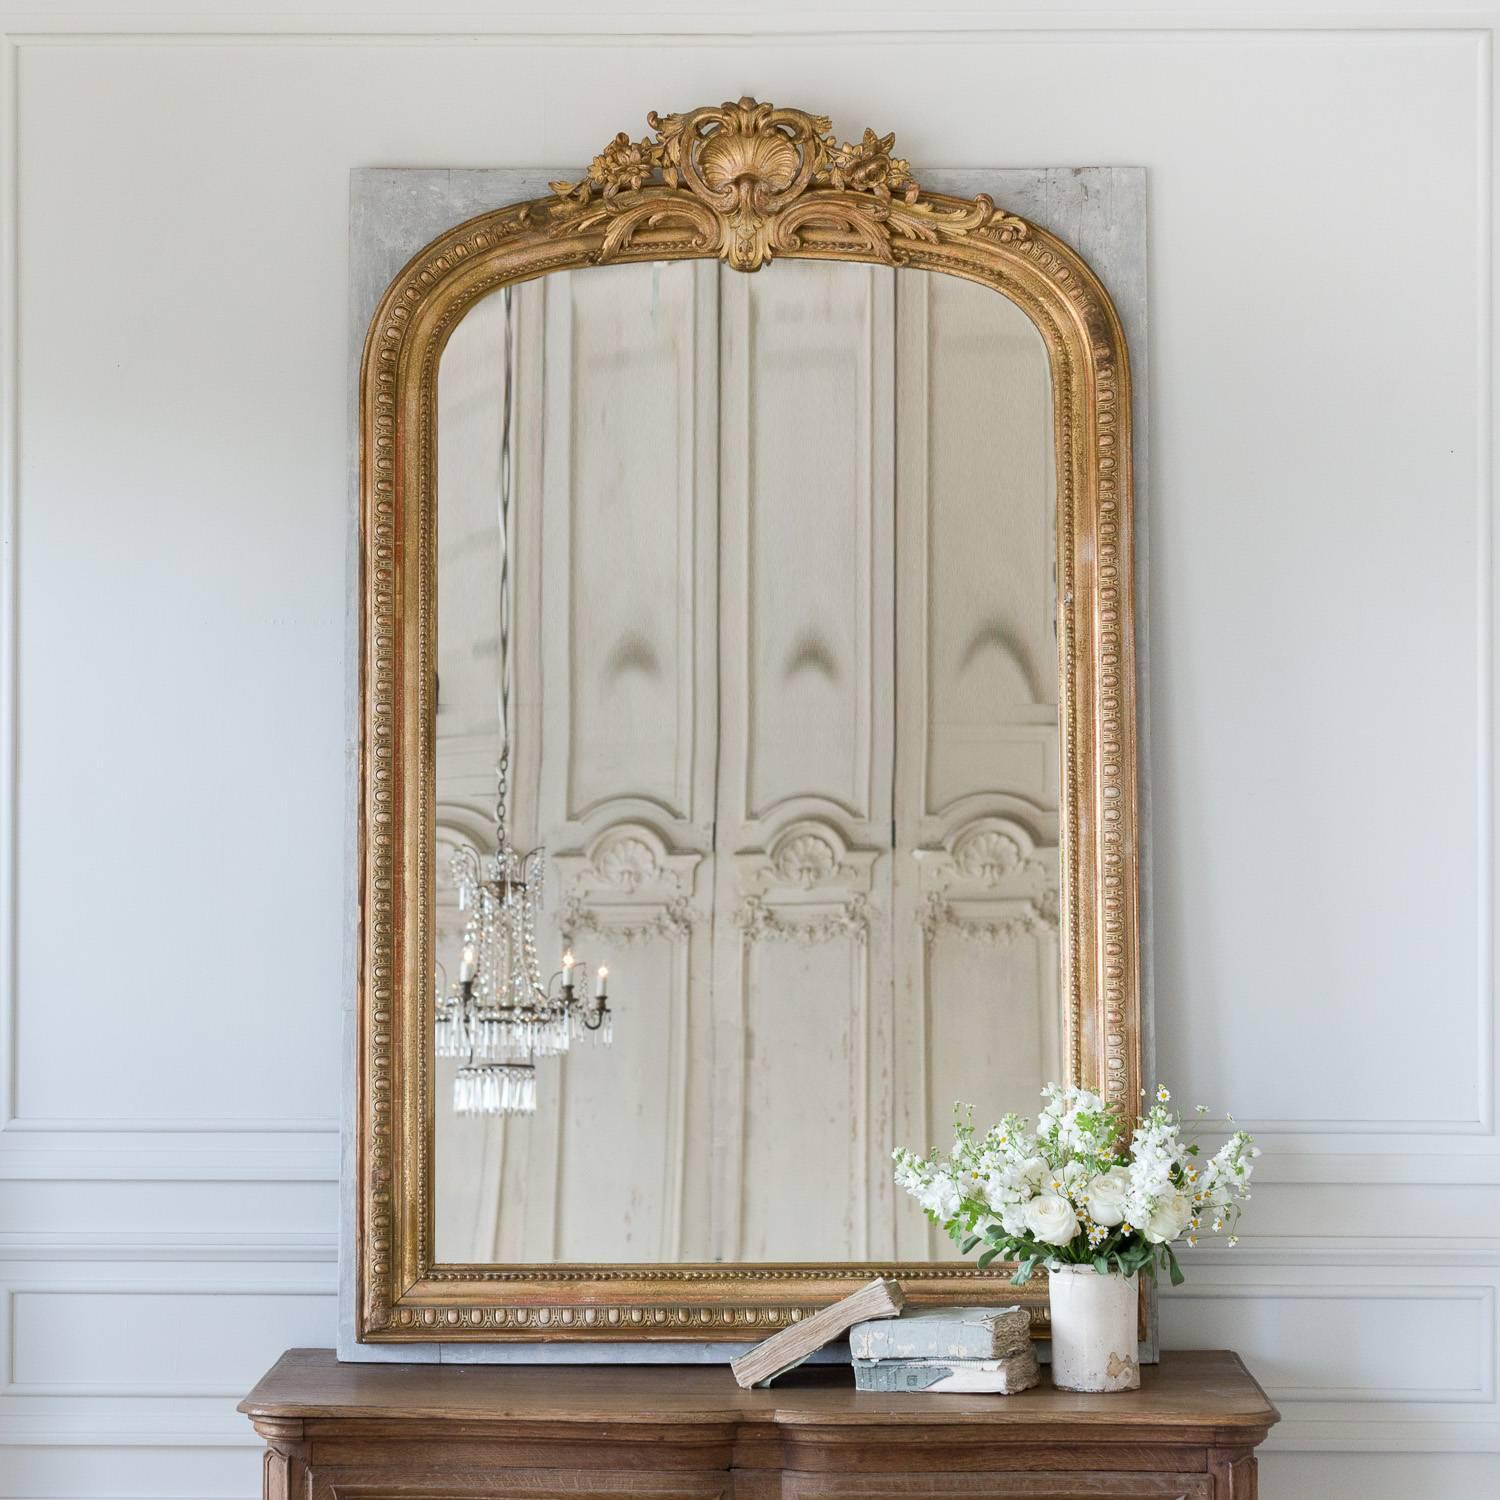 Beautiful, crested mirror with a large shell-themed crest. This unique piece is secured to a soft grey, wood board for extra support. The carved crest scrolls down the shoulders of the frame and dips just slightly over the glass. This wonderful